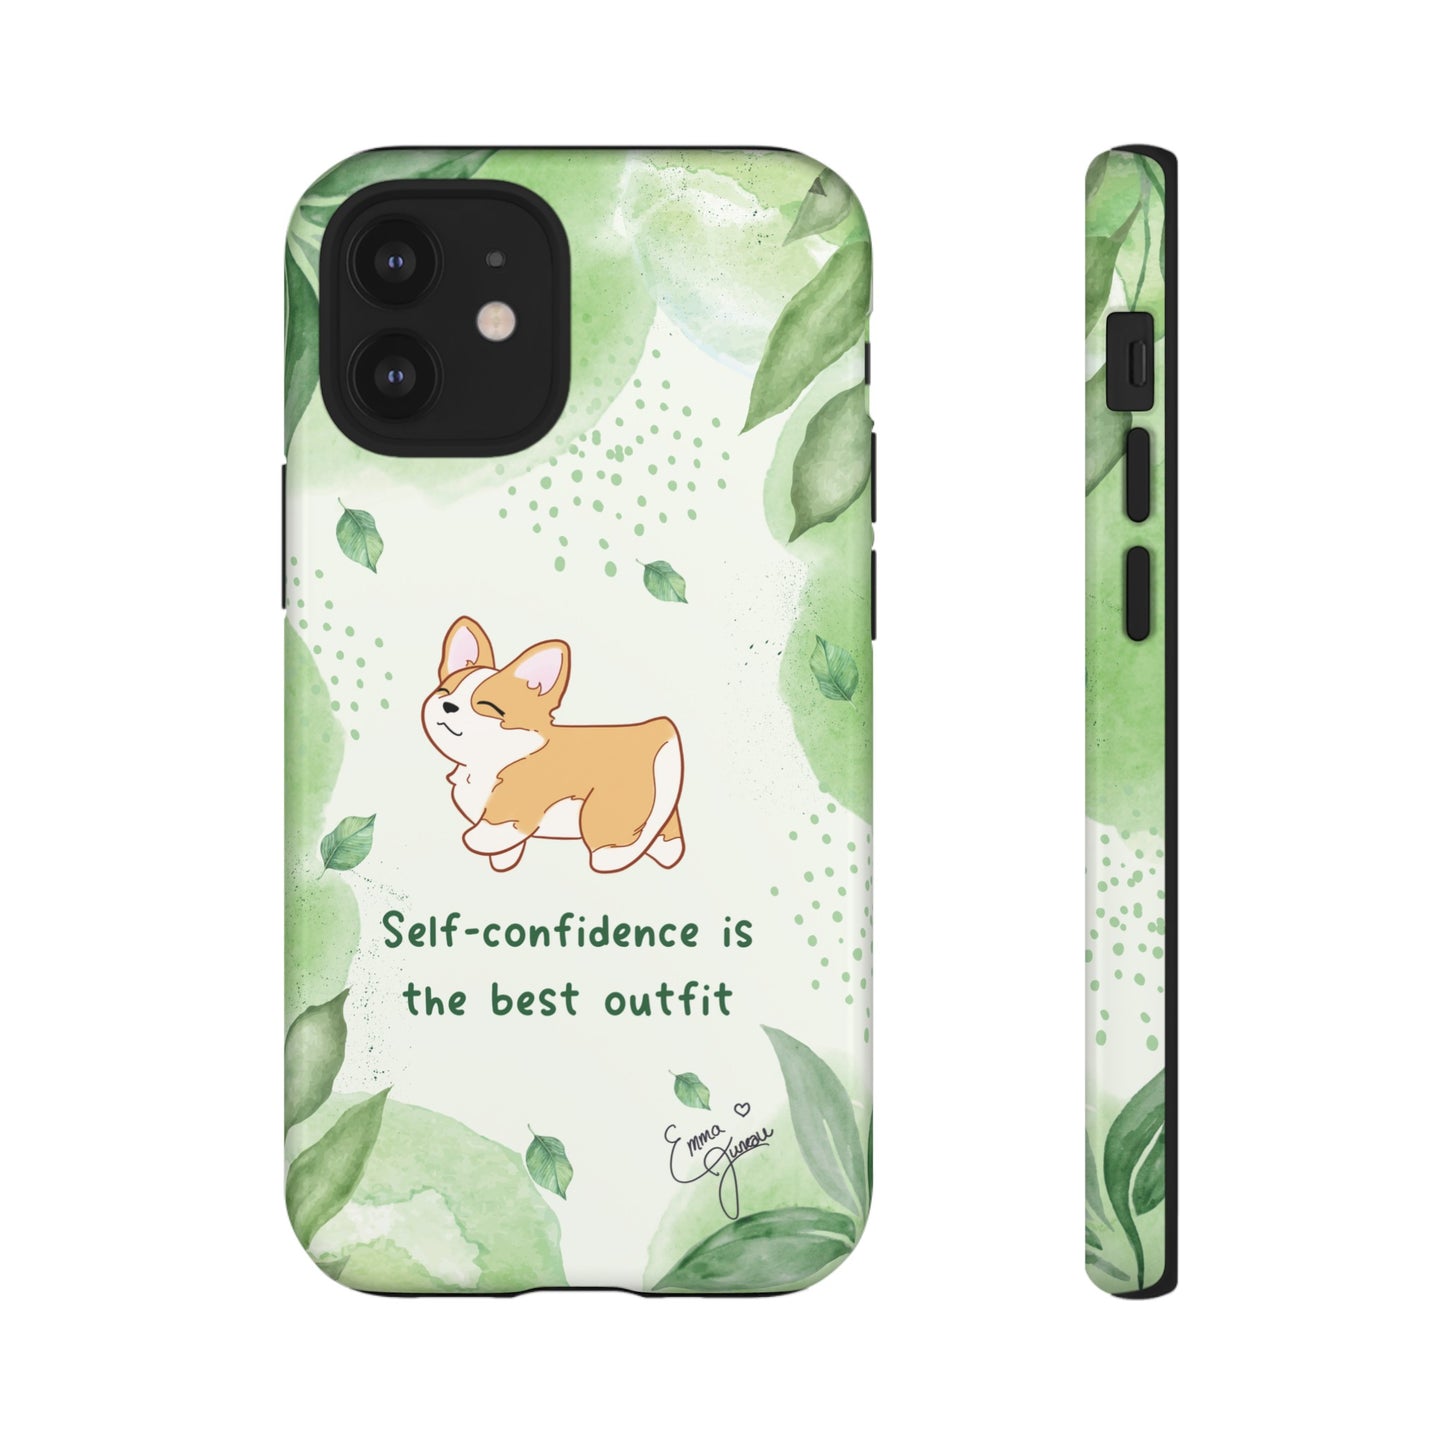 Corgi Green Tough Phone Case - Self Confidence is the Best Outfit